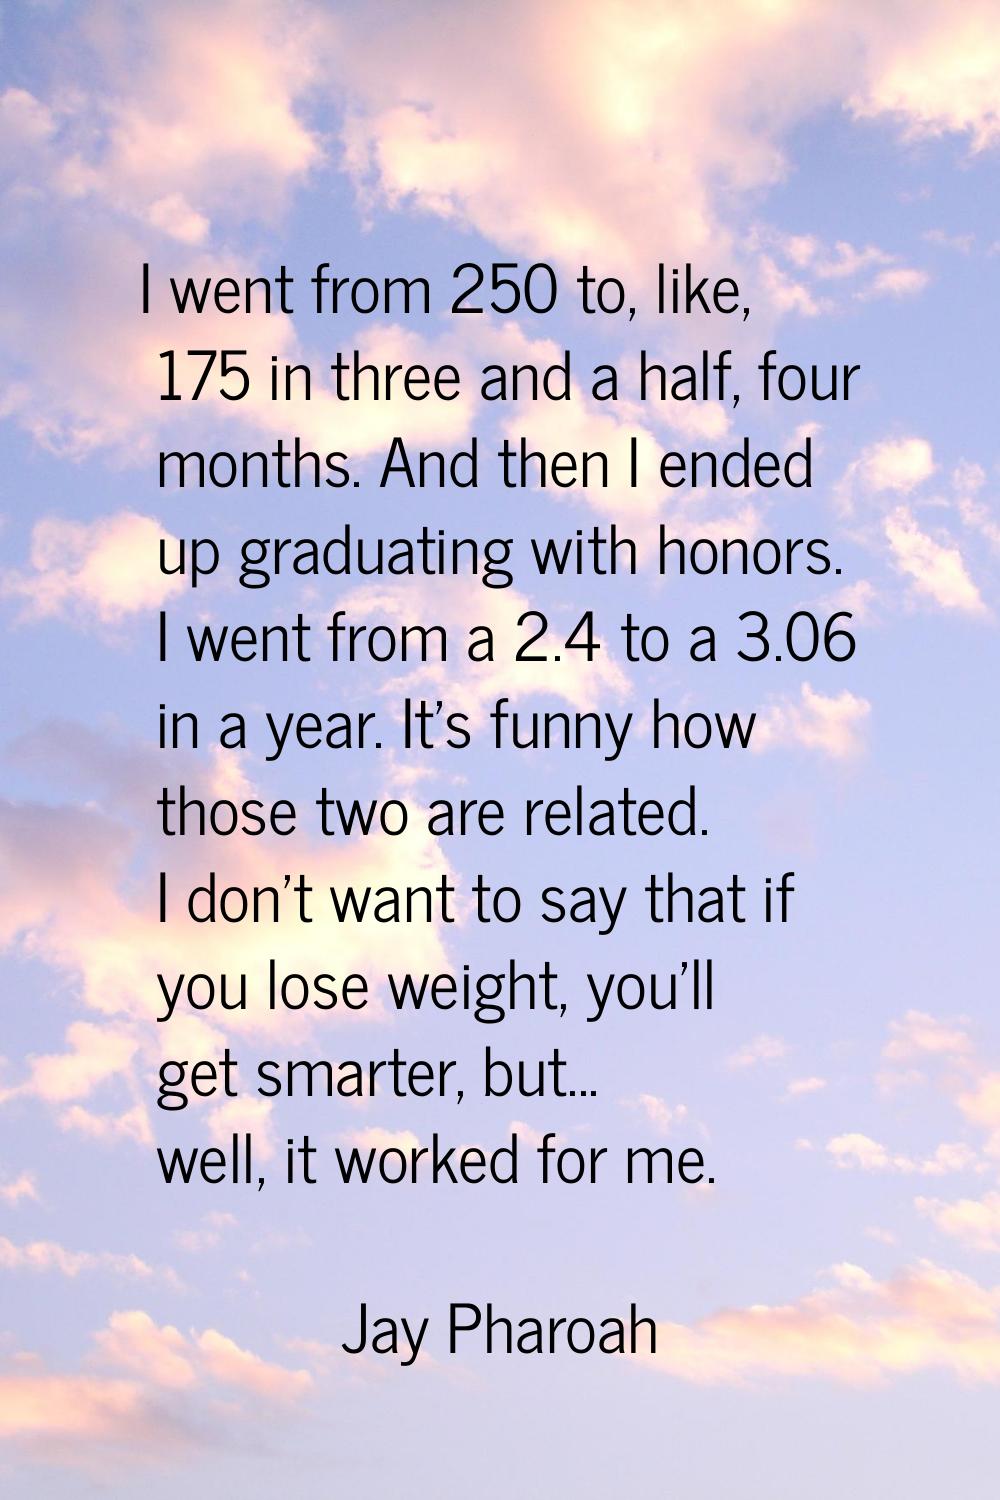 I went from 250 to, like, 175 in three and a half, four months. And then I ended up graduating with